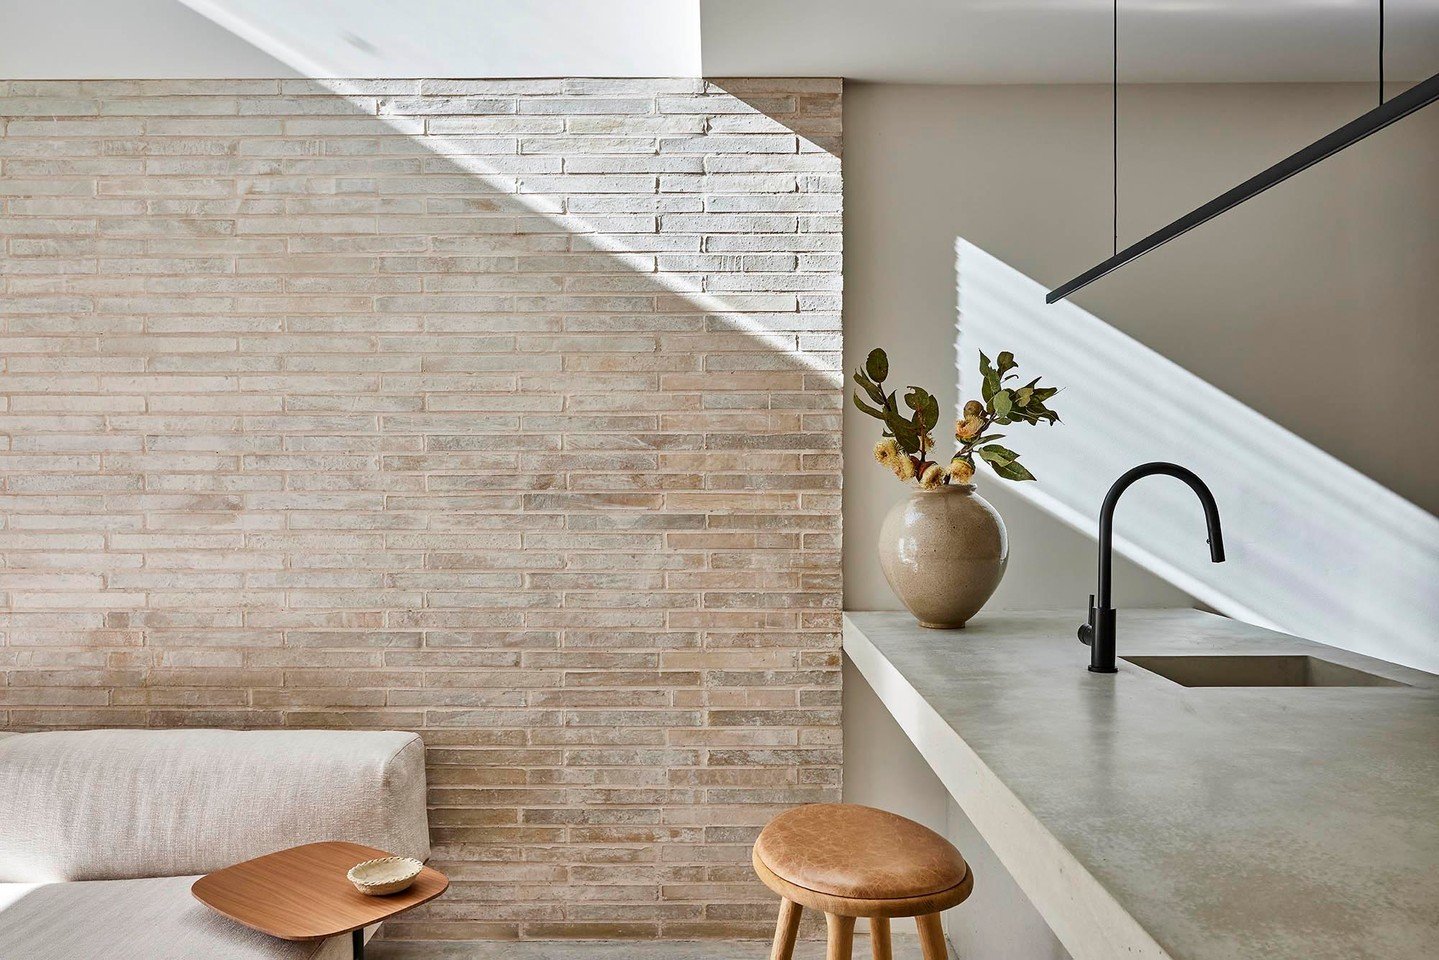 A picture of urban charm, the interior of this Surry Hills Terrace is lined with Emperor Bricks in Ghost, cleverly designed by @studioarkive to harness the morning sun and bring warmth to the kitchen and living spaces.

Architecture and Interiors: @s